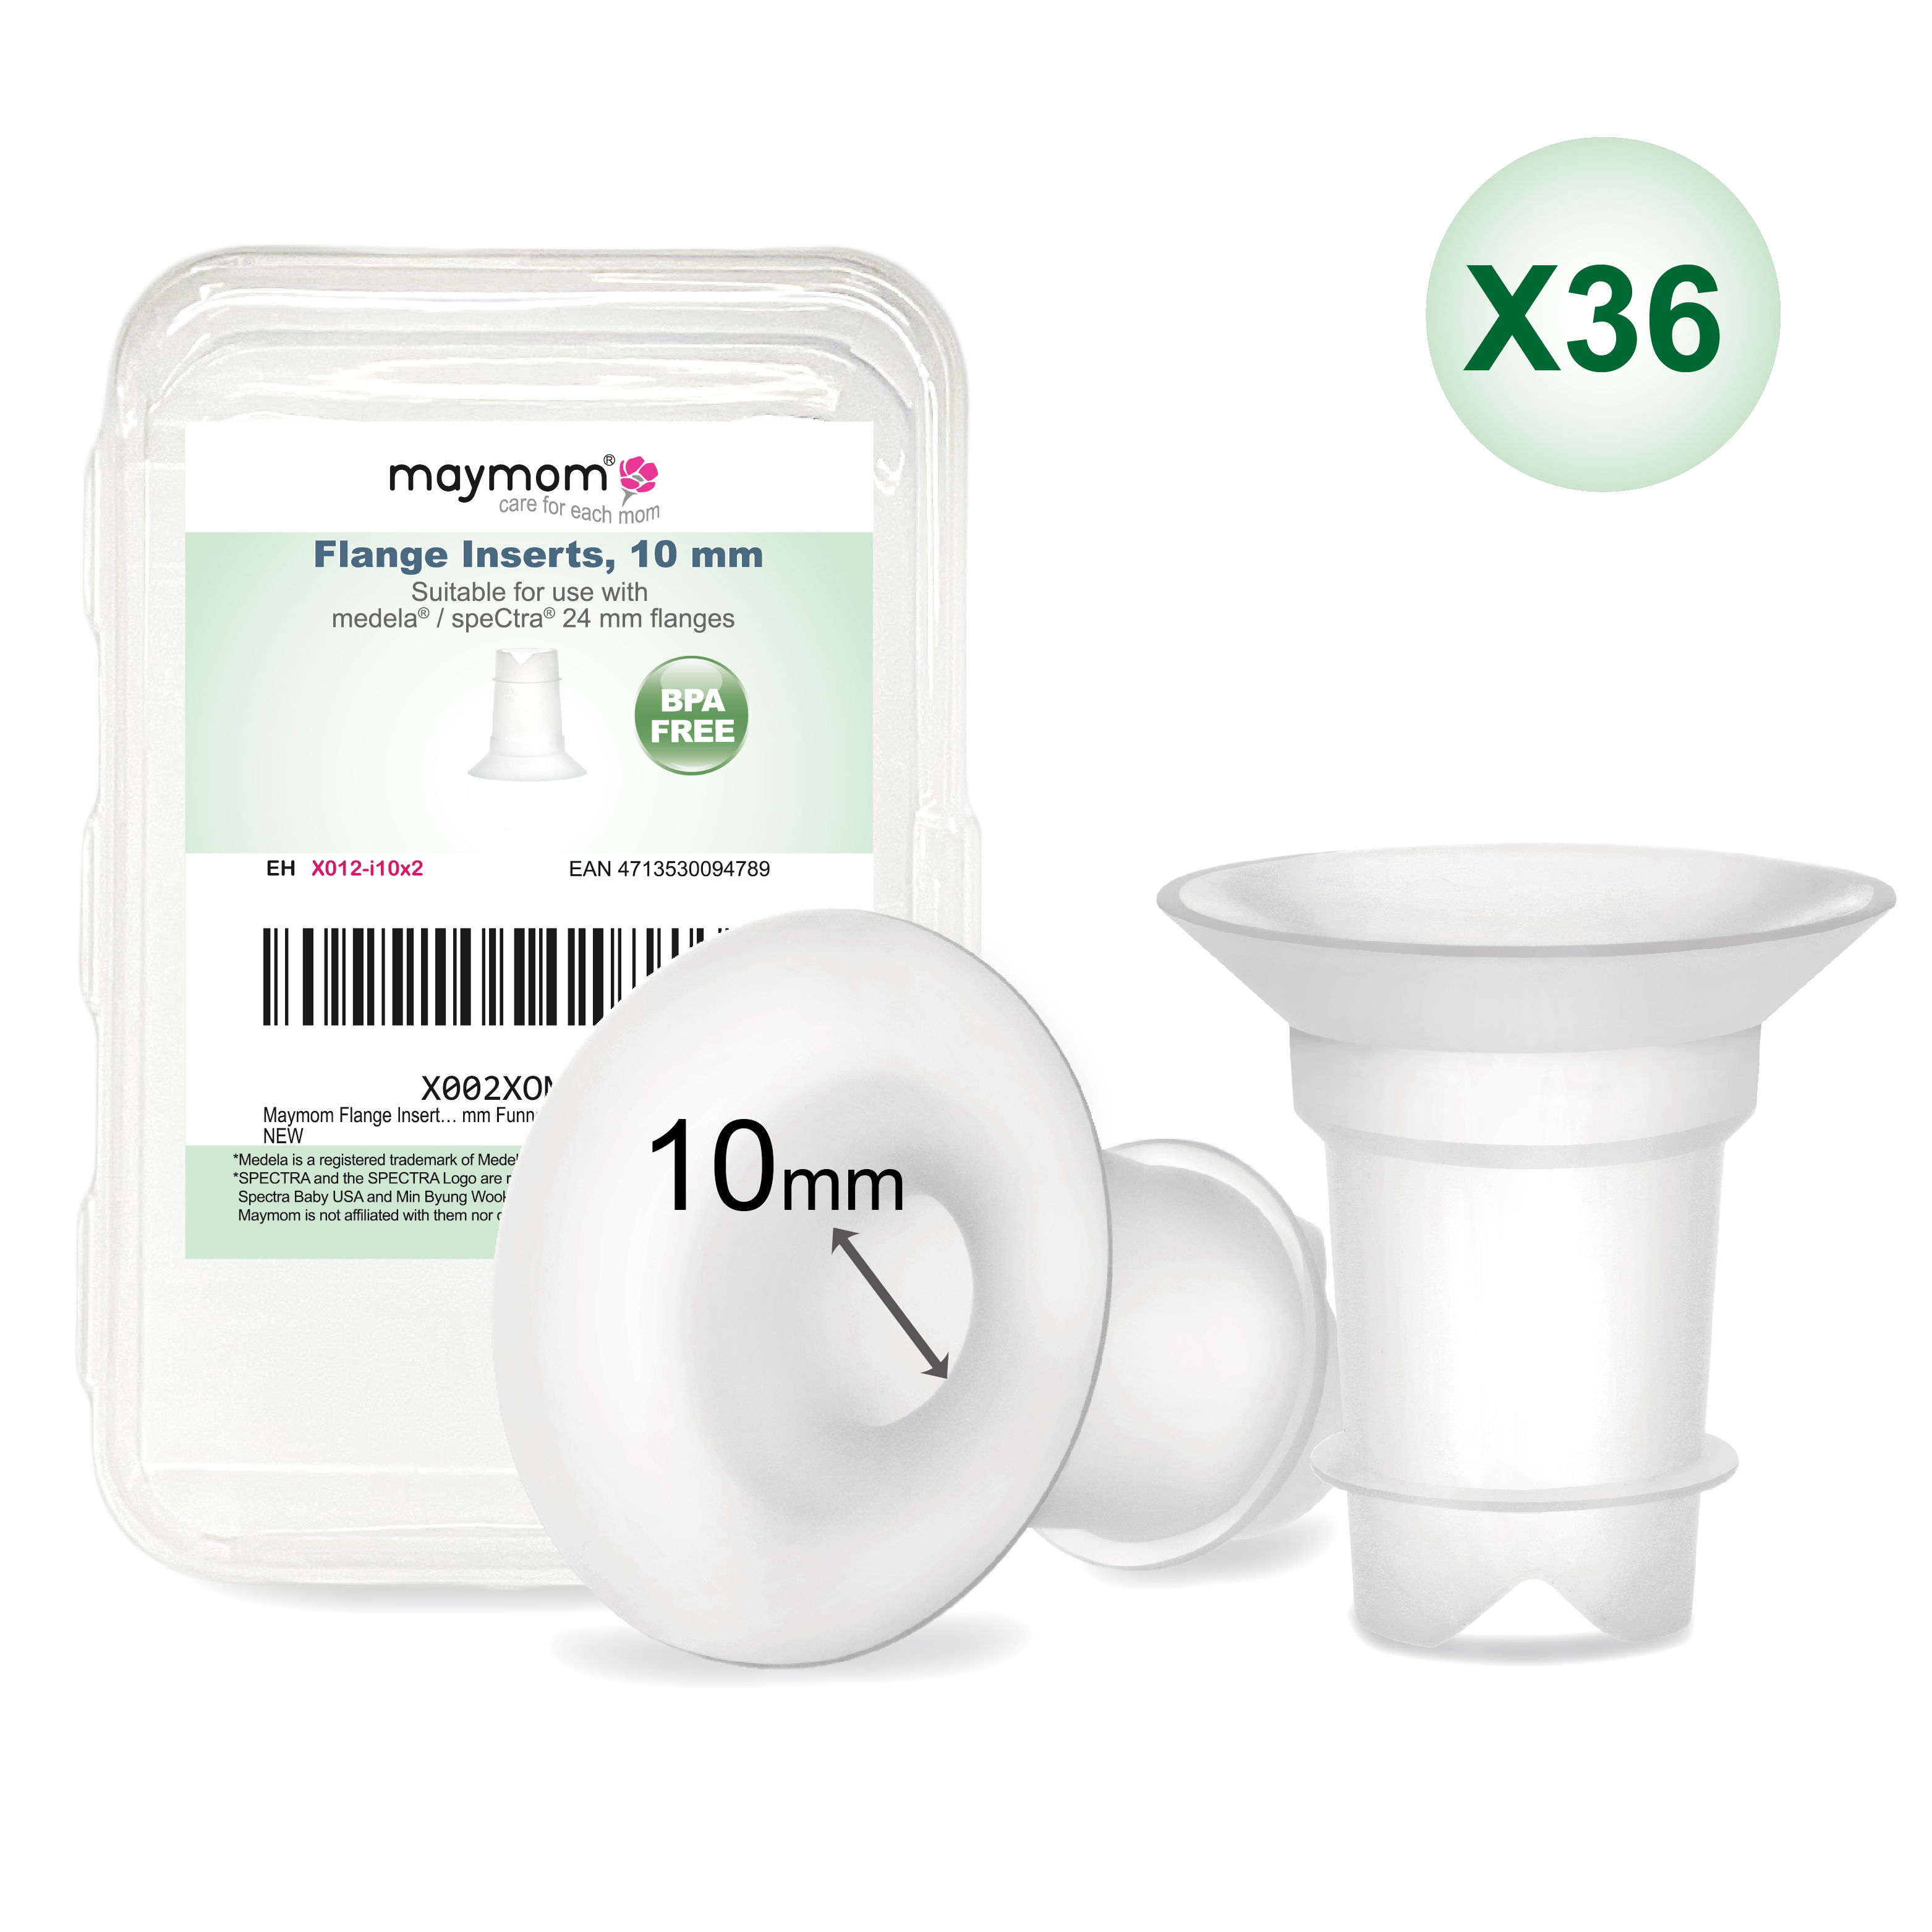 Maymom Flange Inserts 10 mm for Medela, Spectra 24 mm Shields/Flanges, Momcozy/Willow Wearable Cup. Compatible with Medela Frees